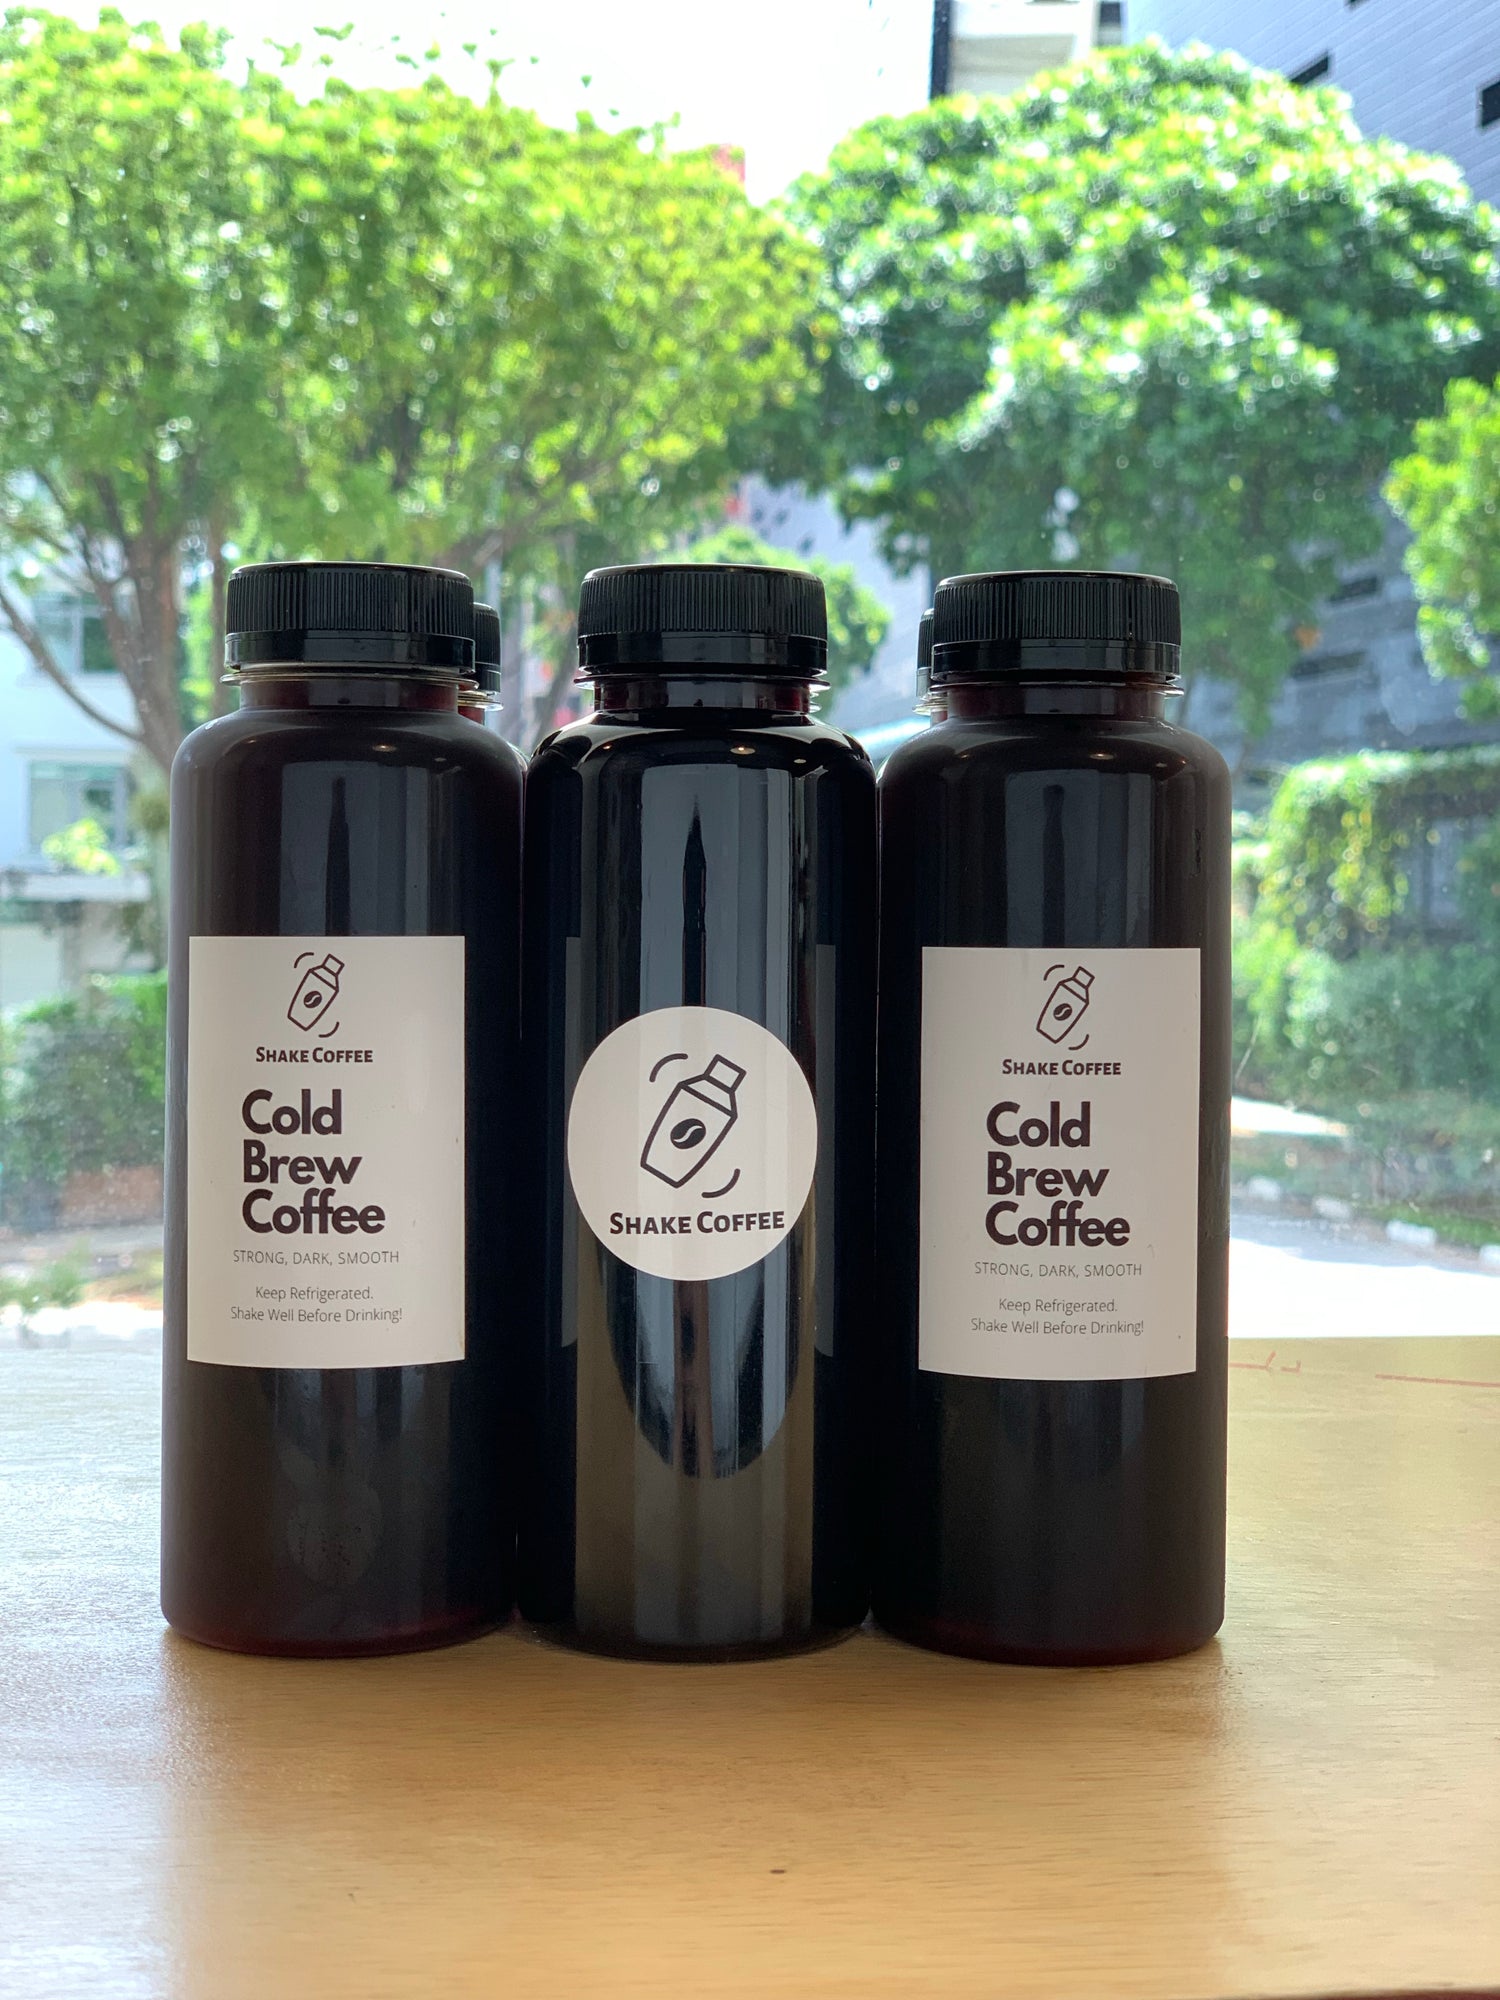 6-Pack Cold Brew Coffees (Black) - Shake Coffee SG